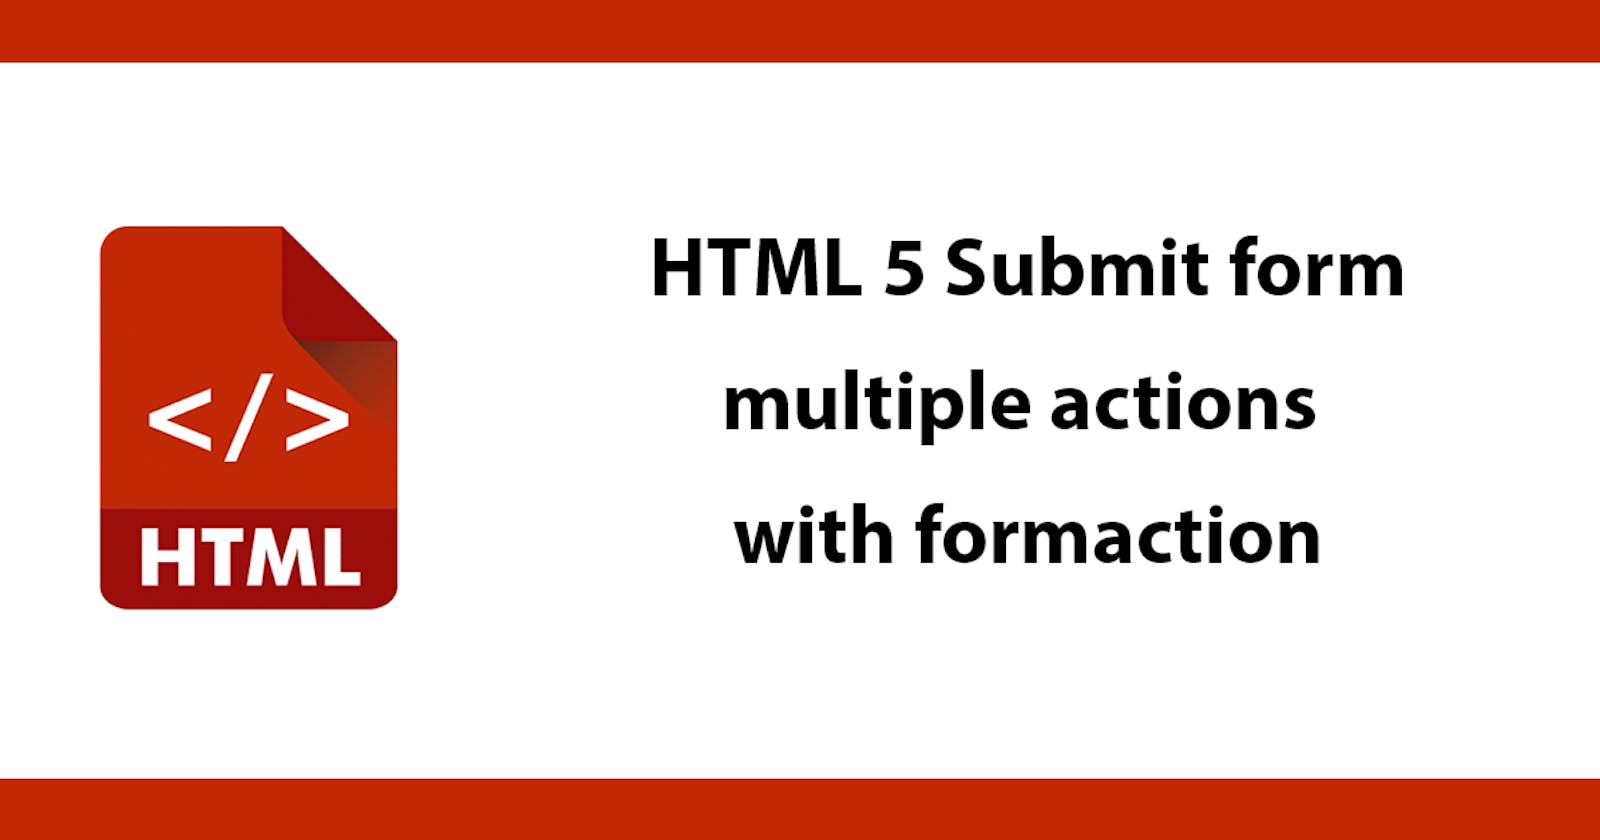 HTML 5 Submit form - multiple actions with formaction